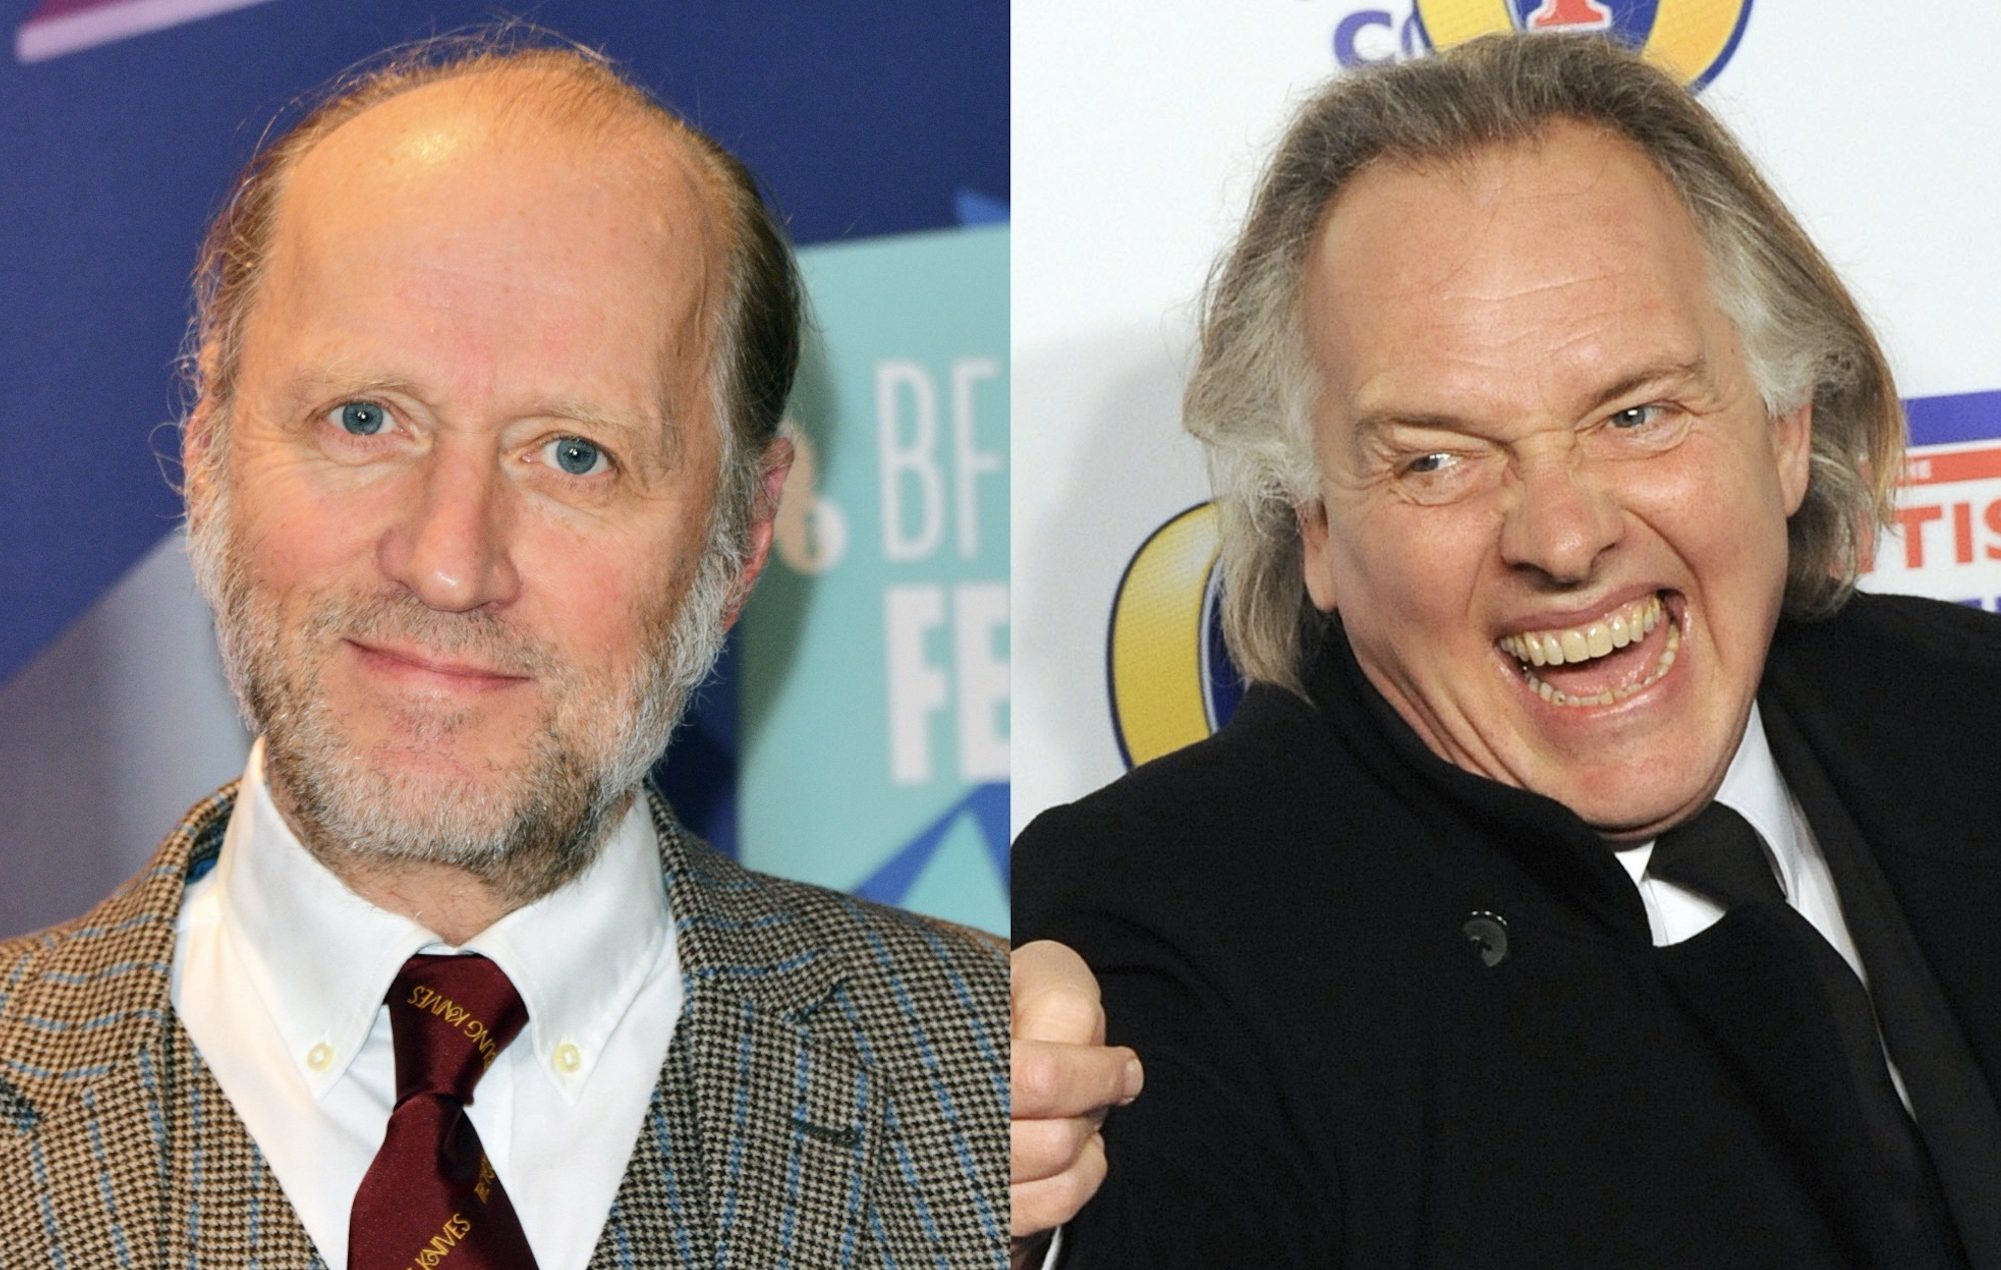 Ade Edmondson admits “strained” relationship with Rik Mayall before comedian’s death